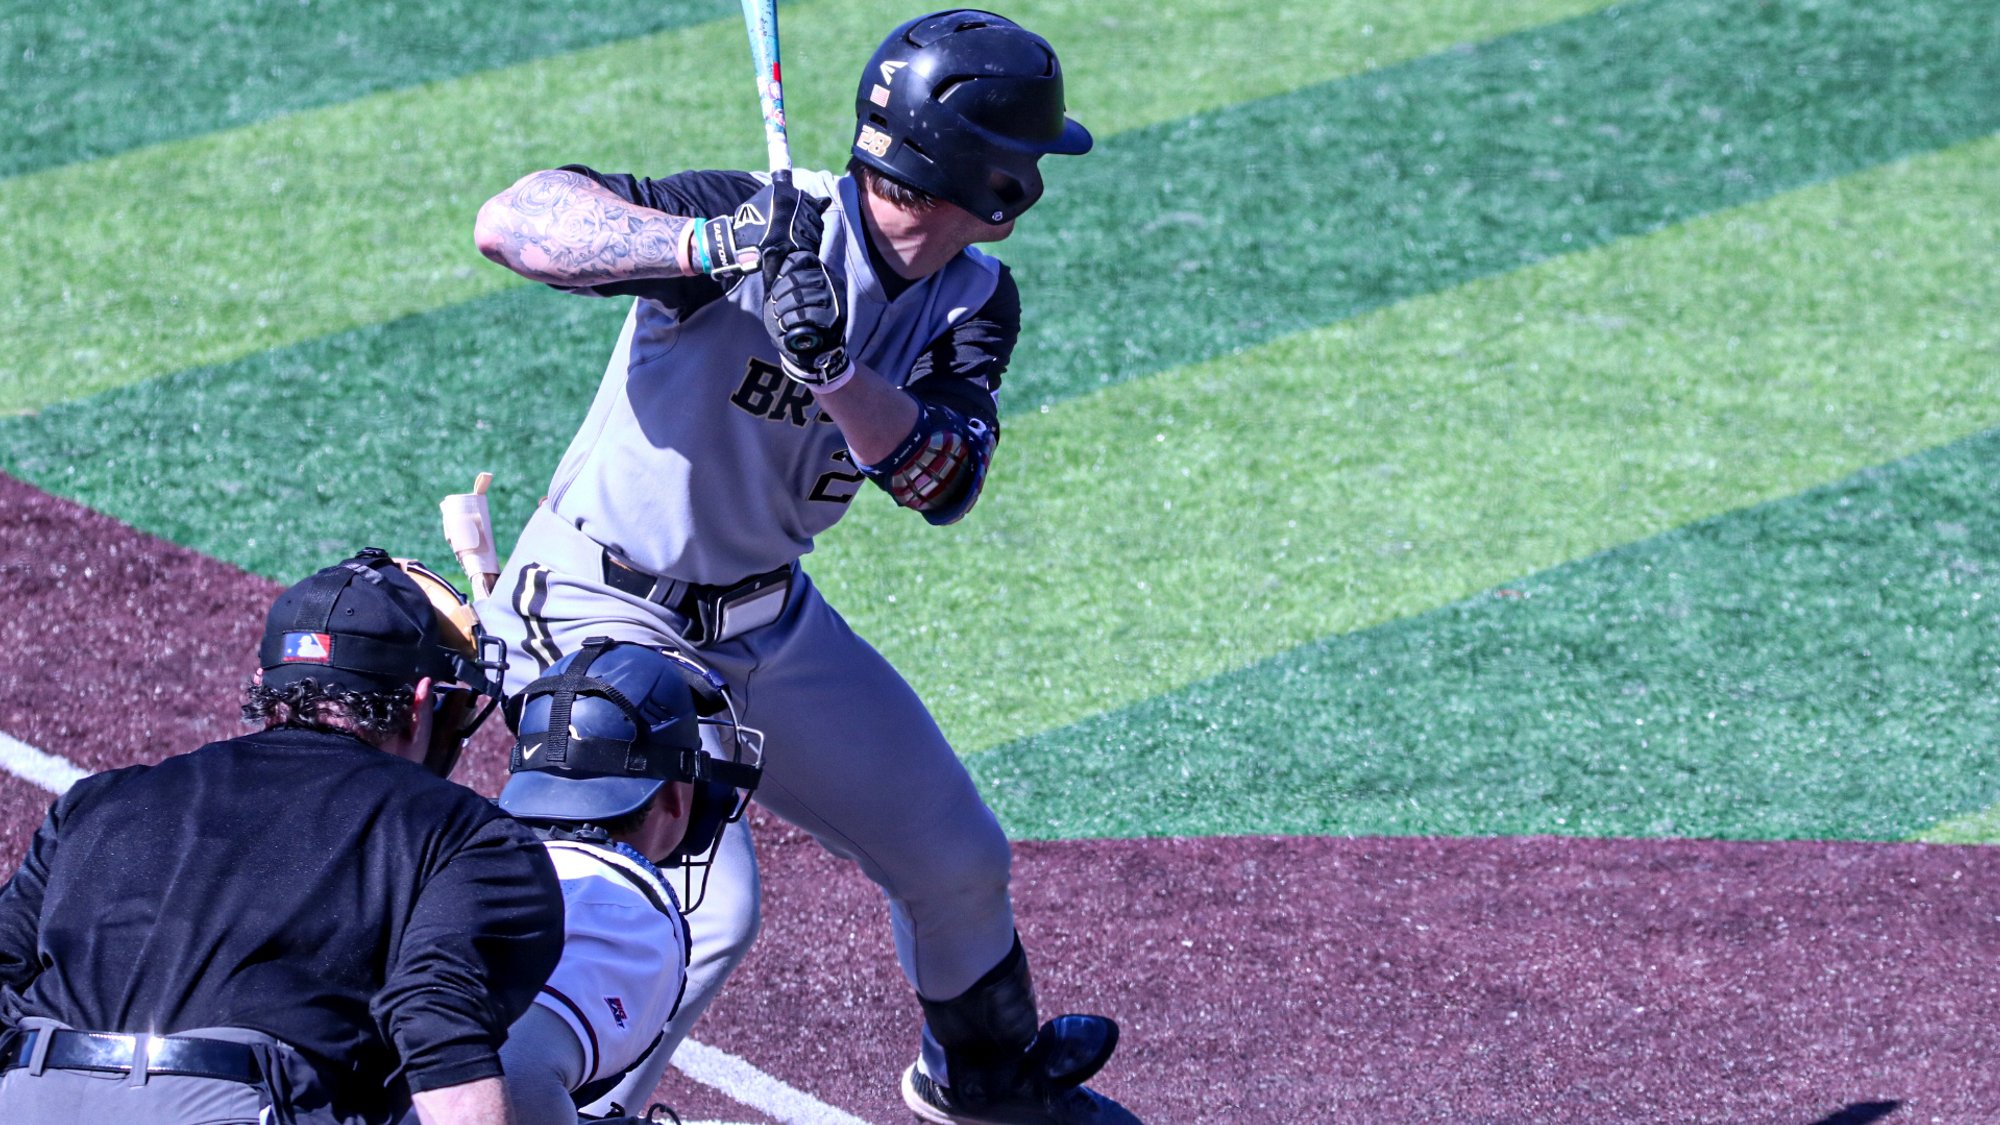 Bryant welcomes Binghamton to Conaty Park for America East series